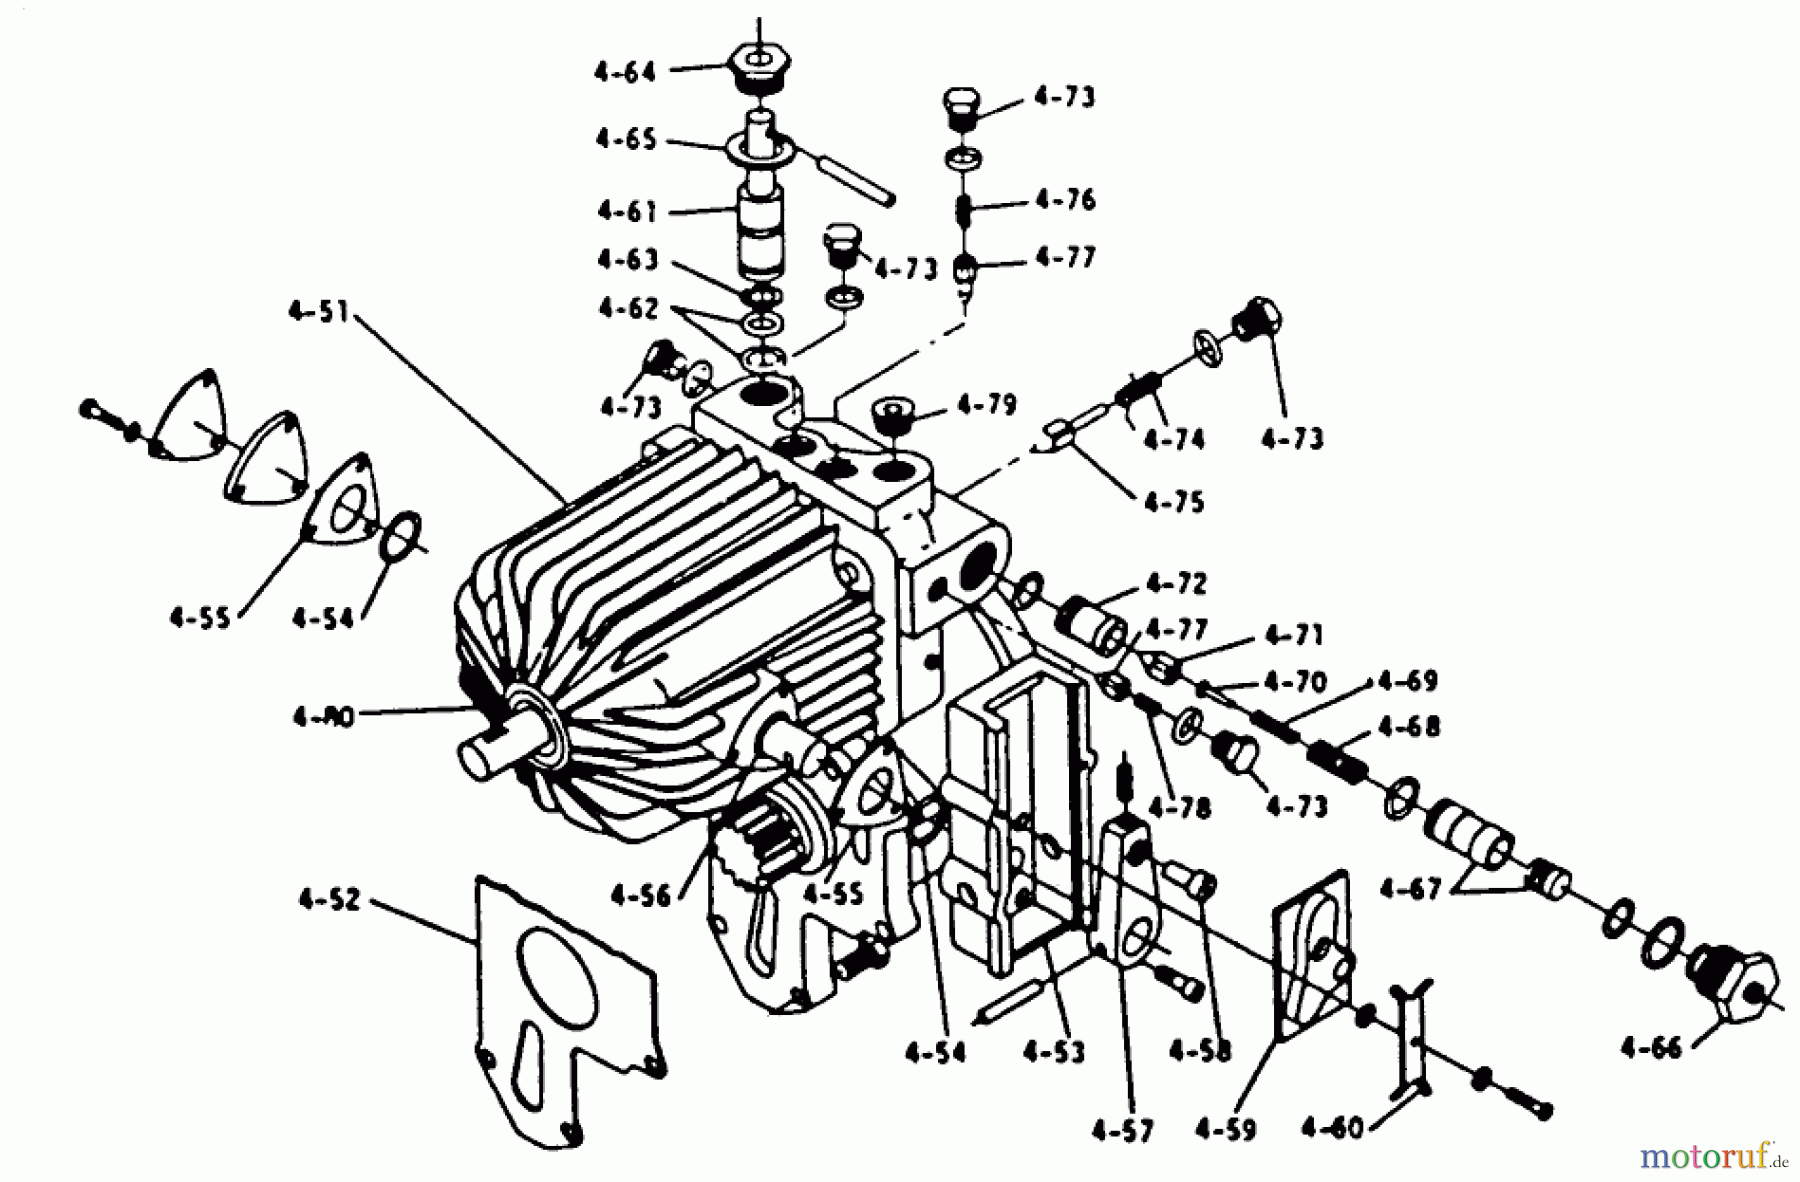  Toro Neu Mowers, Lawn & Garden Tractor Seite 1 1-0470 - Toro 10 hp Automatic Tractor, 1973 PARTS LIST FOR 4.050 HYDROGEAR (PLATE 4.4)